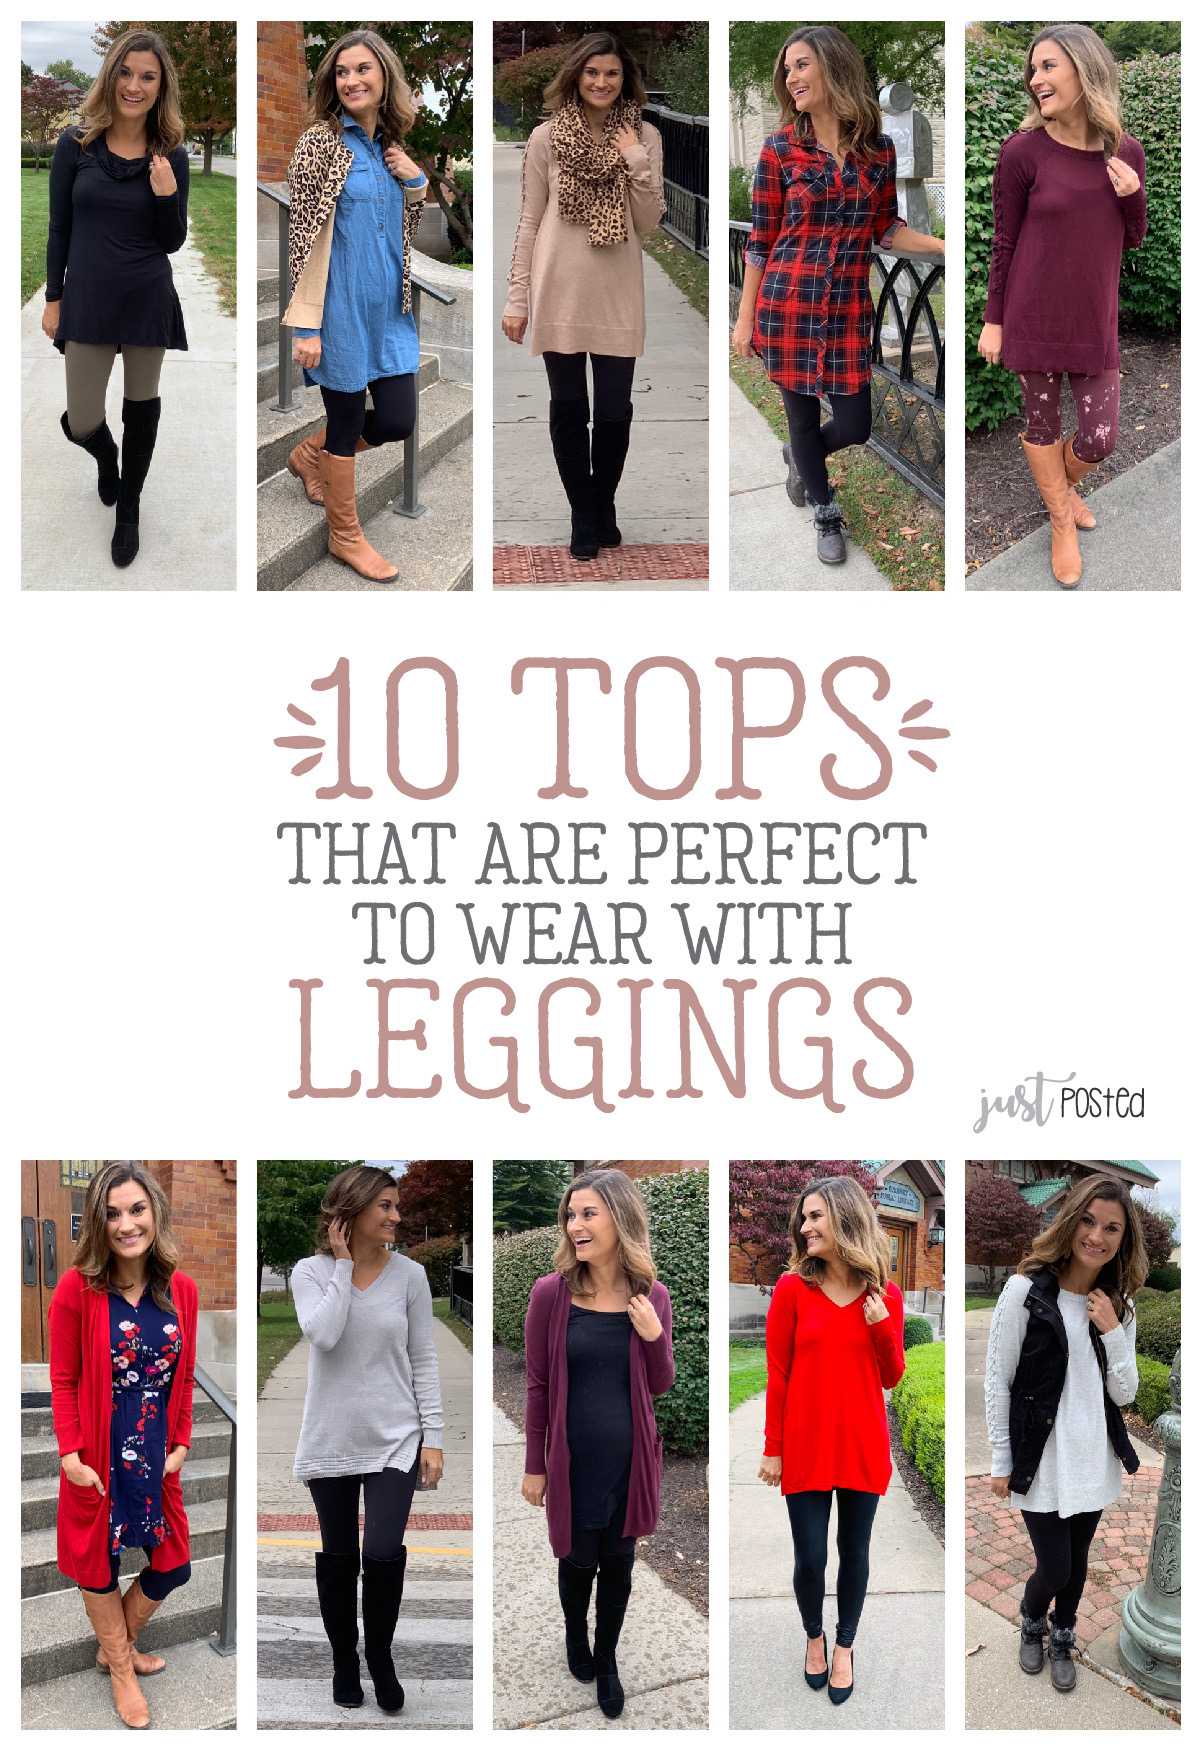 Selvrespekt Gum på 10 Tops from Kohl's that are Perfect to Wear with Leggings – Just Posted